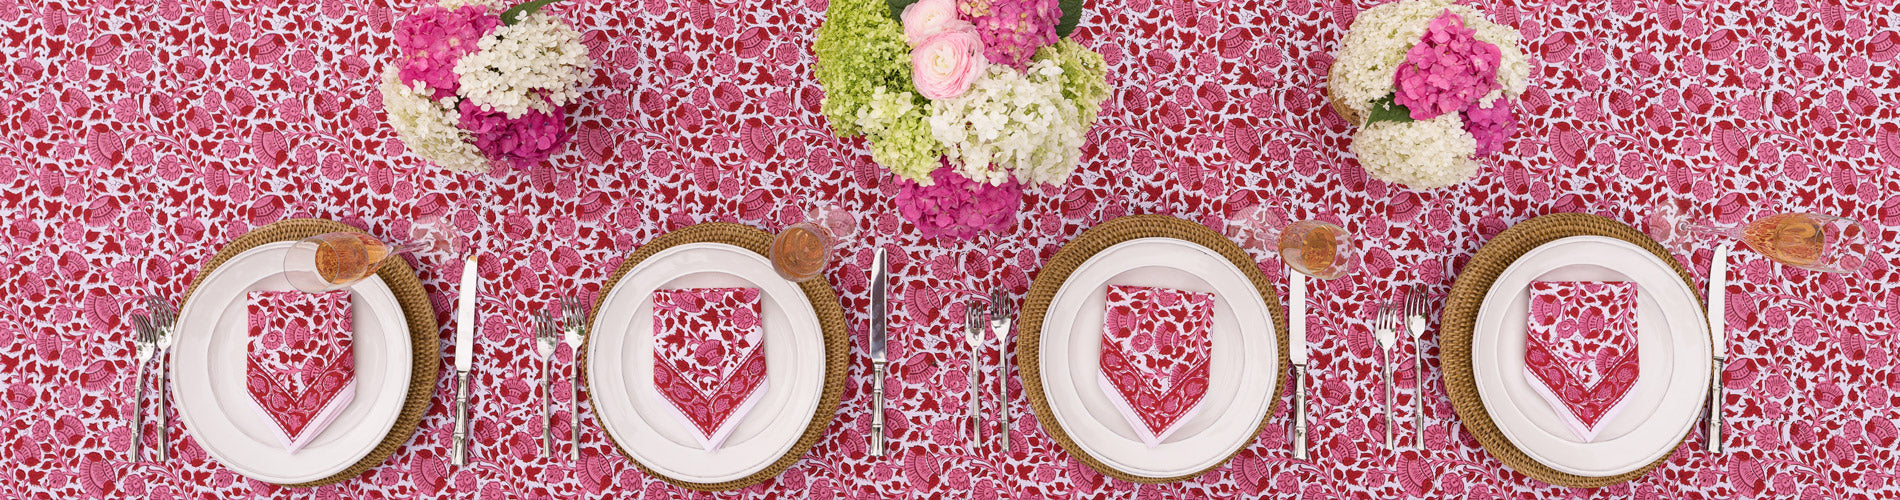 Valentines Day Red & Pink Table Linens & Accessories | Pomegranate Inc.